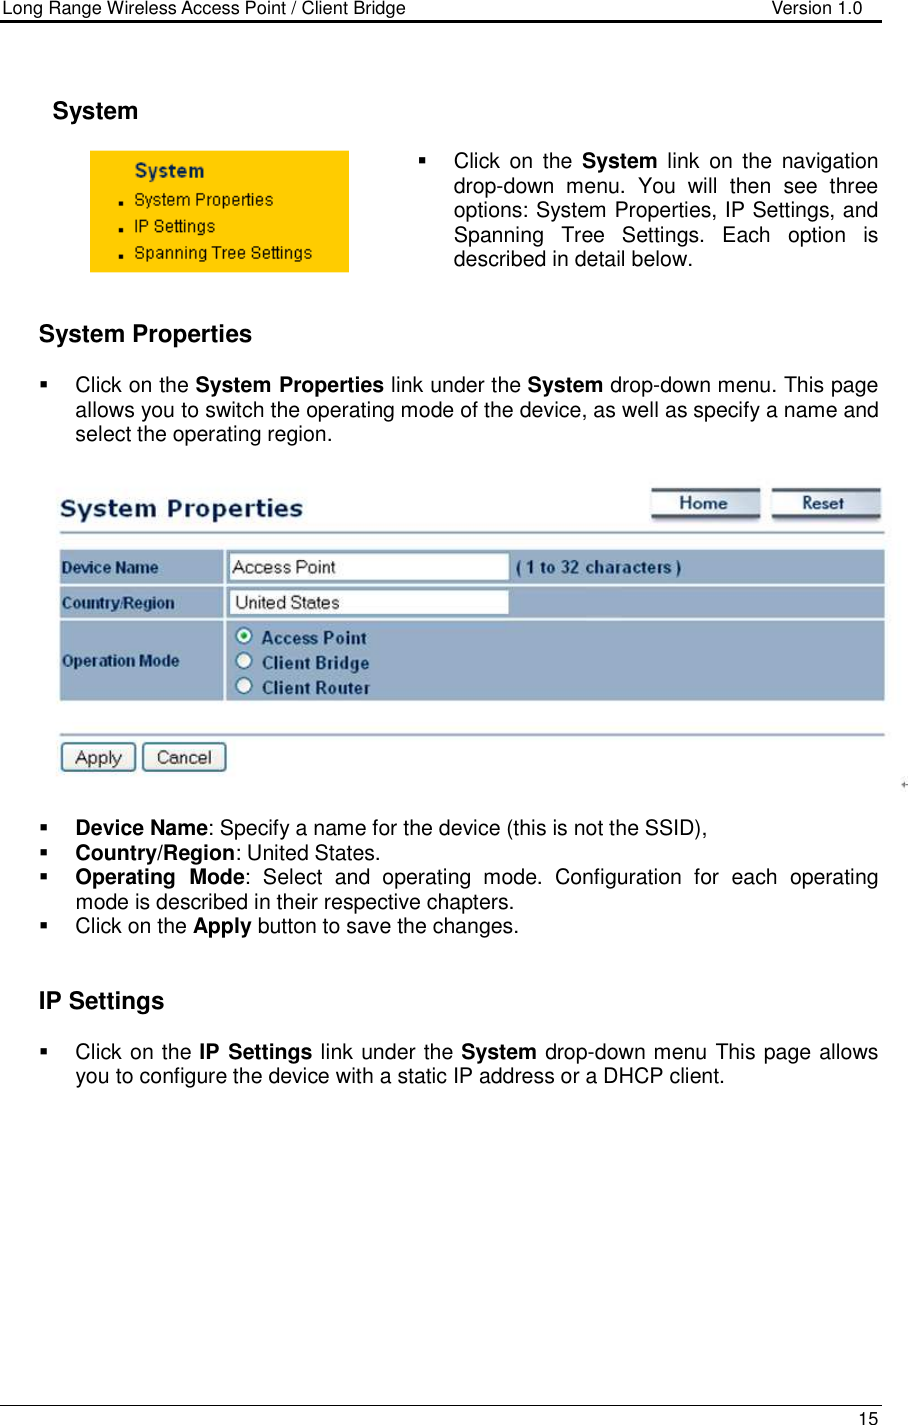 Long Range Wireless Access Point / Client Bridge                                   Version 1.0    15        System    Click  on  the  System  link  on  the  navigation drop-down  menu.  You  will  then  see  three options: System Properties, IP Settings, and Spanning  Tree  Settings.  Each  option  is described in detail below.      System Properties    Click on the System Properties link under the System drop-down menu. This page allows you to switch the operating mode of the device, as well as specify a name and select the operating region.      Device Name: Specify a name for the device (this is not the SSID),  Country/Region: United States.  Operating  Mode:  Select  and  operating  mode.  Configuration  for  each  operating mode is described in their respective chapters.    Click on the Apply button to save the changes.      IP Settings   Click on the IP Settings link under the System drop-down menu This page allows you to configure the device with a static IP address or a DHCP client.    